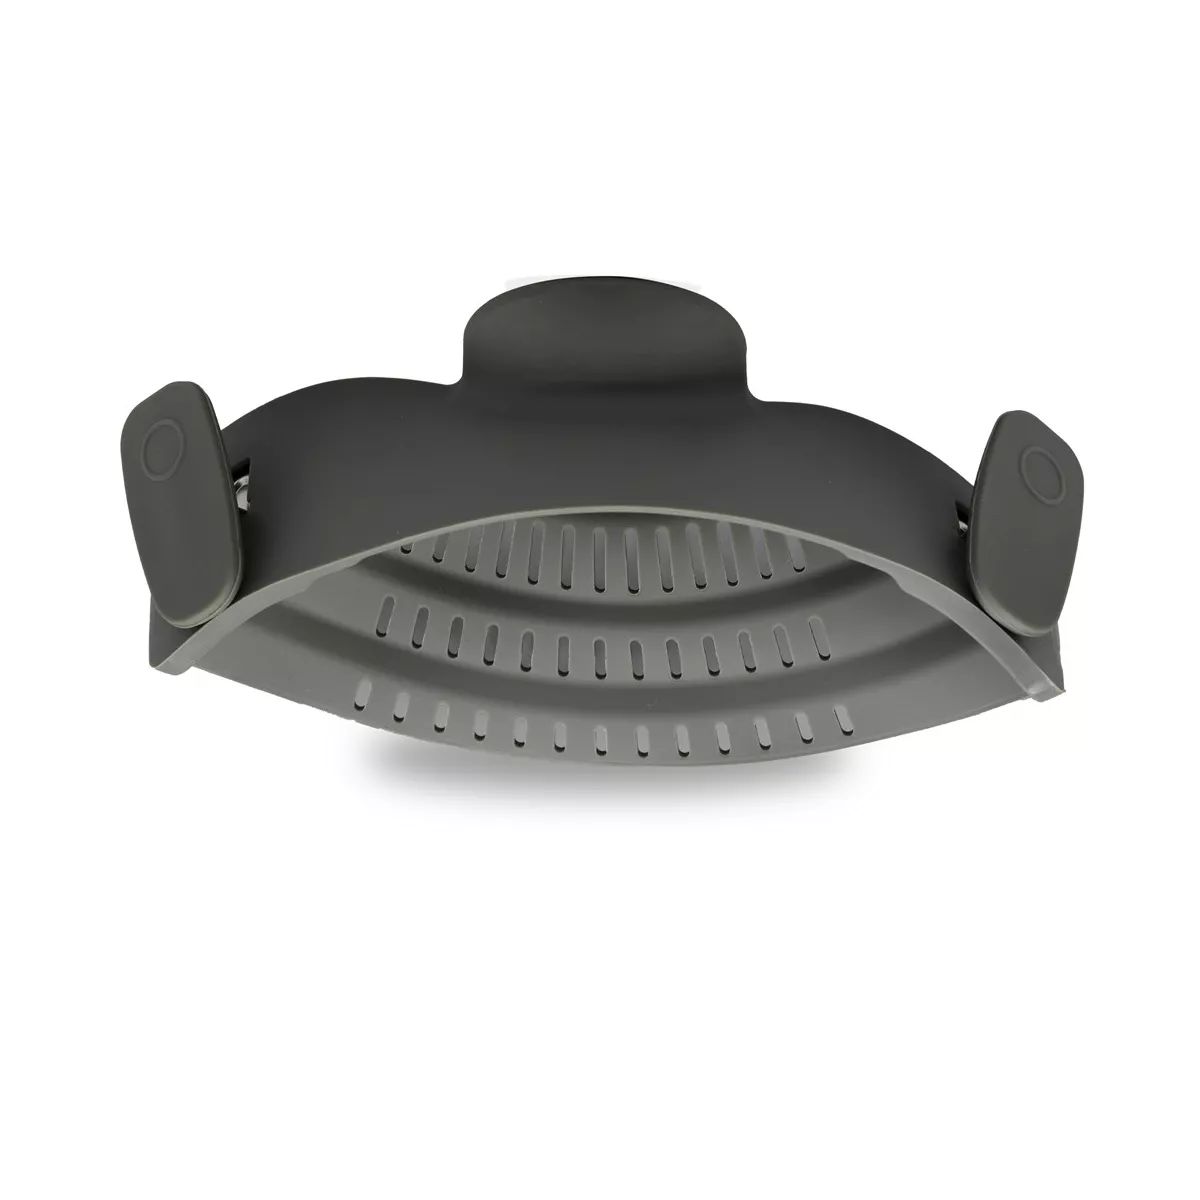 Cheer Collection Heat Resistant Snap-On Pot Strainer | Target